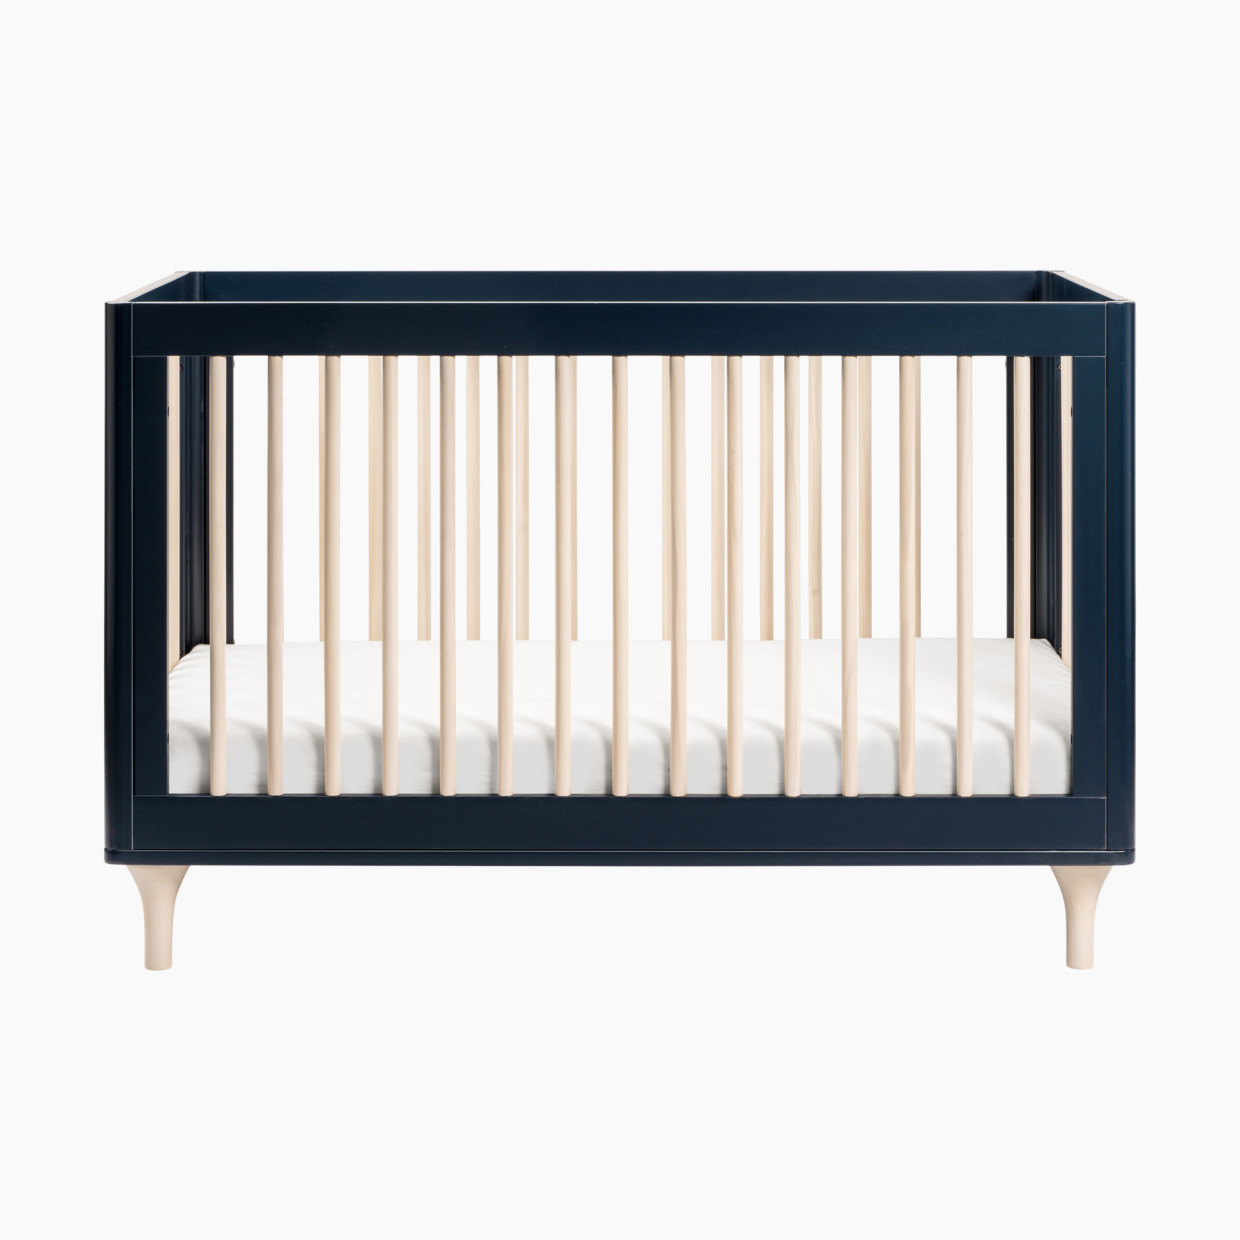 babyletto Lolly 3-in-1 Convertible Crib with Toddler Bed Conversion Kit - Navy/Washed Natural.